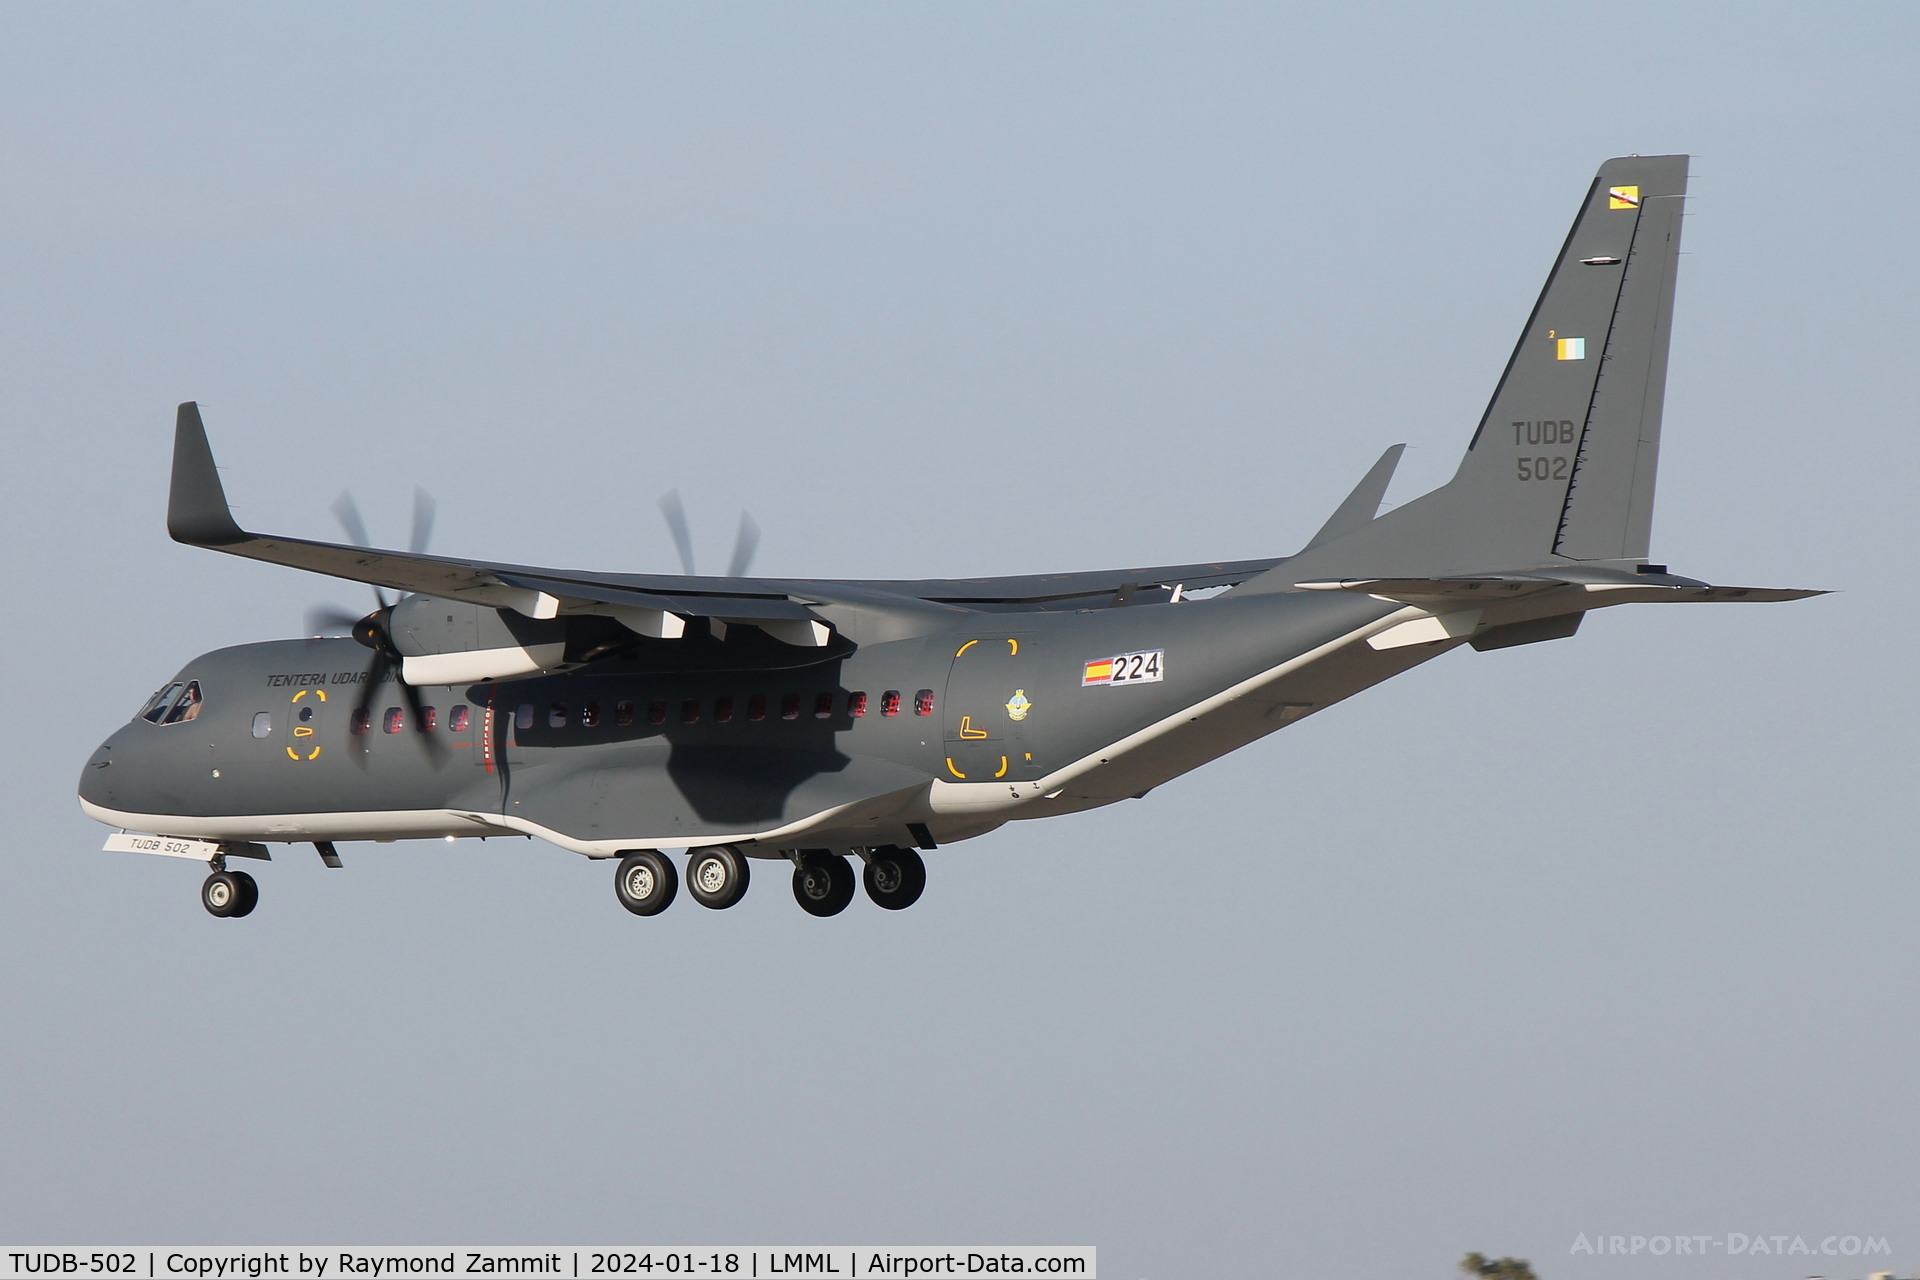 TUDB-502, 2023 Casa C-295W C/N S-224, Casa C-295W TUDB-502 Royal Brunei Air Force